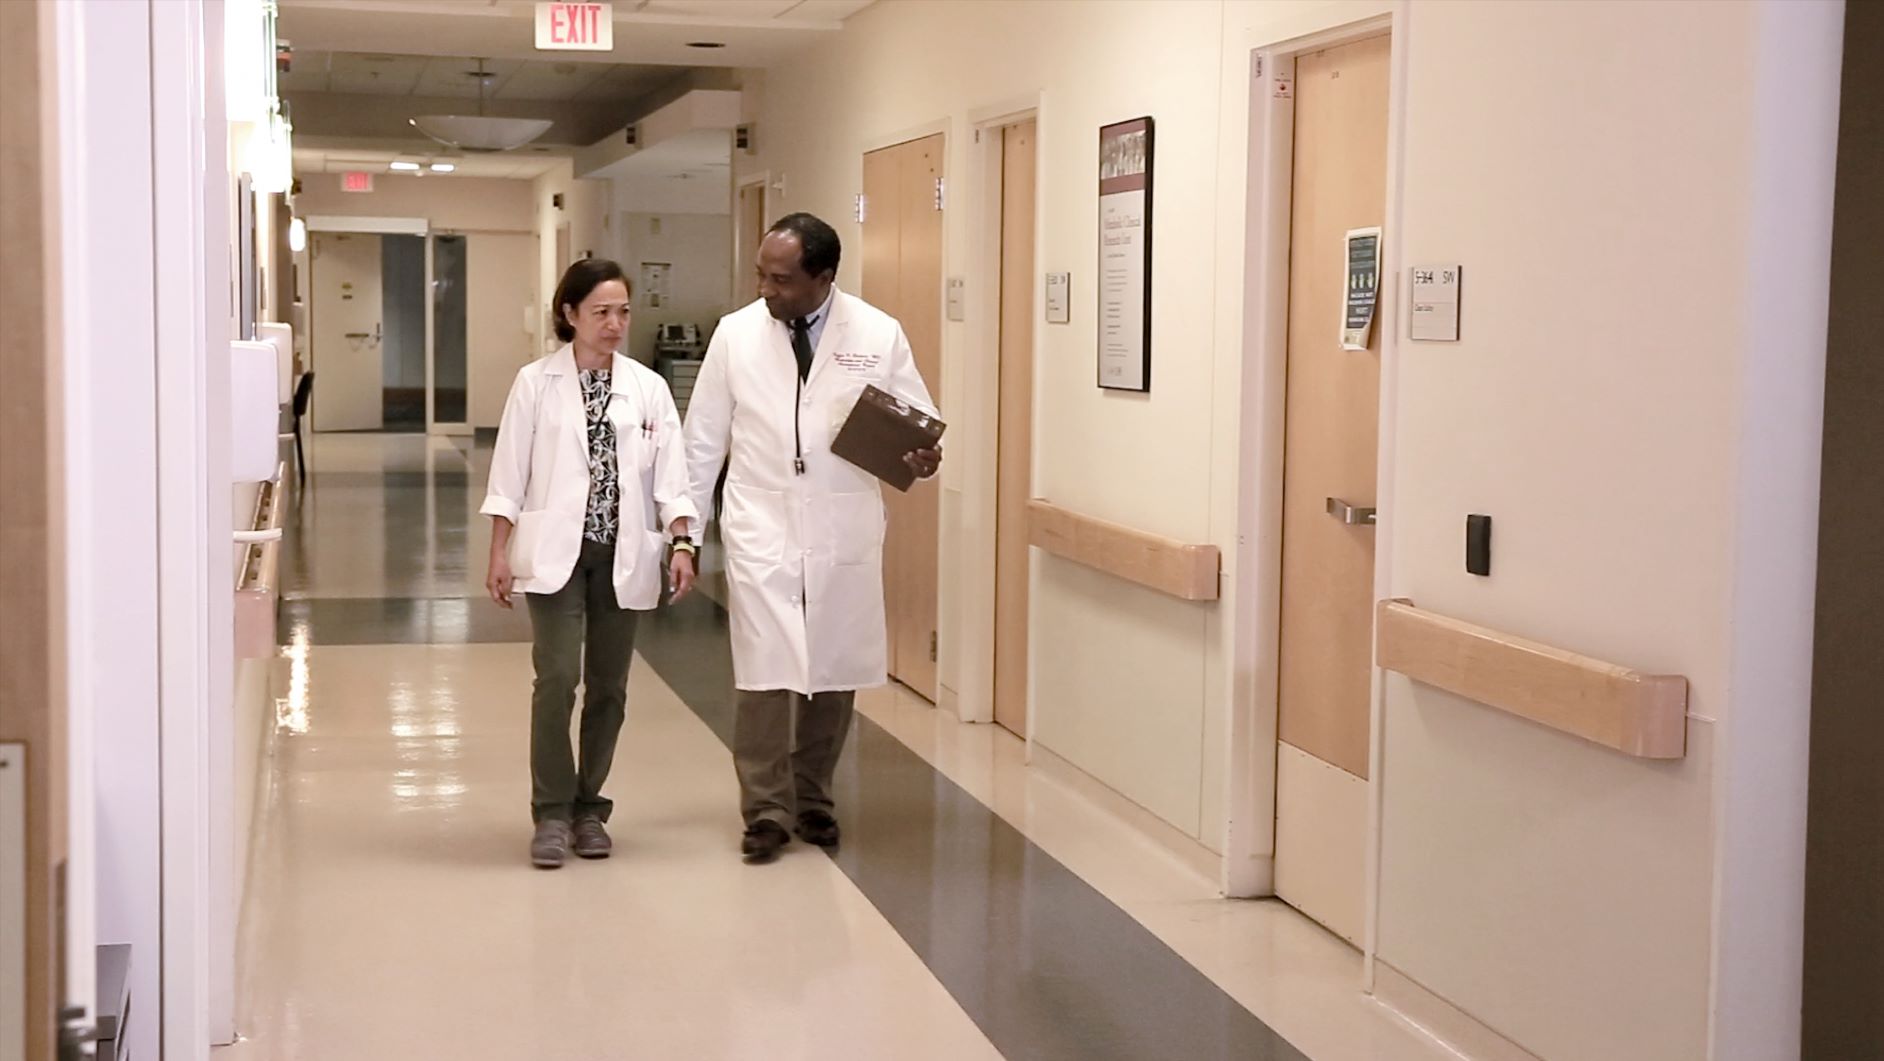 Dr. Rodgers walking through a hallway talking with another doctor.